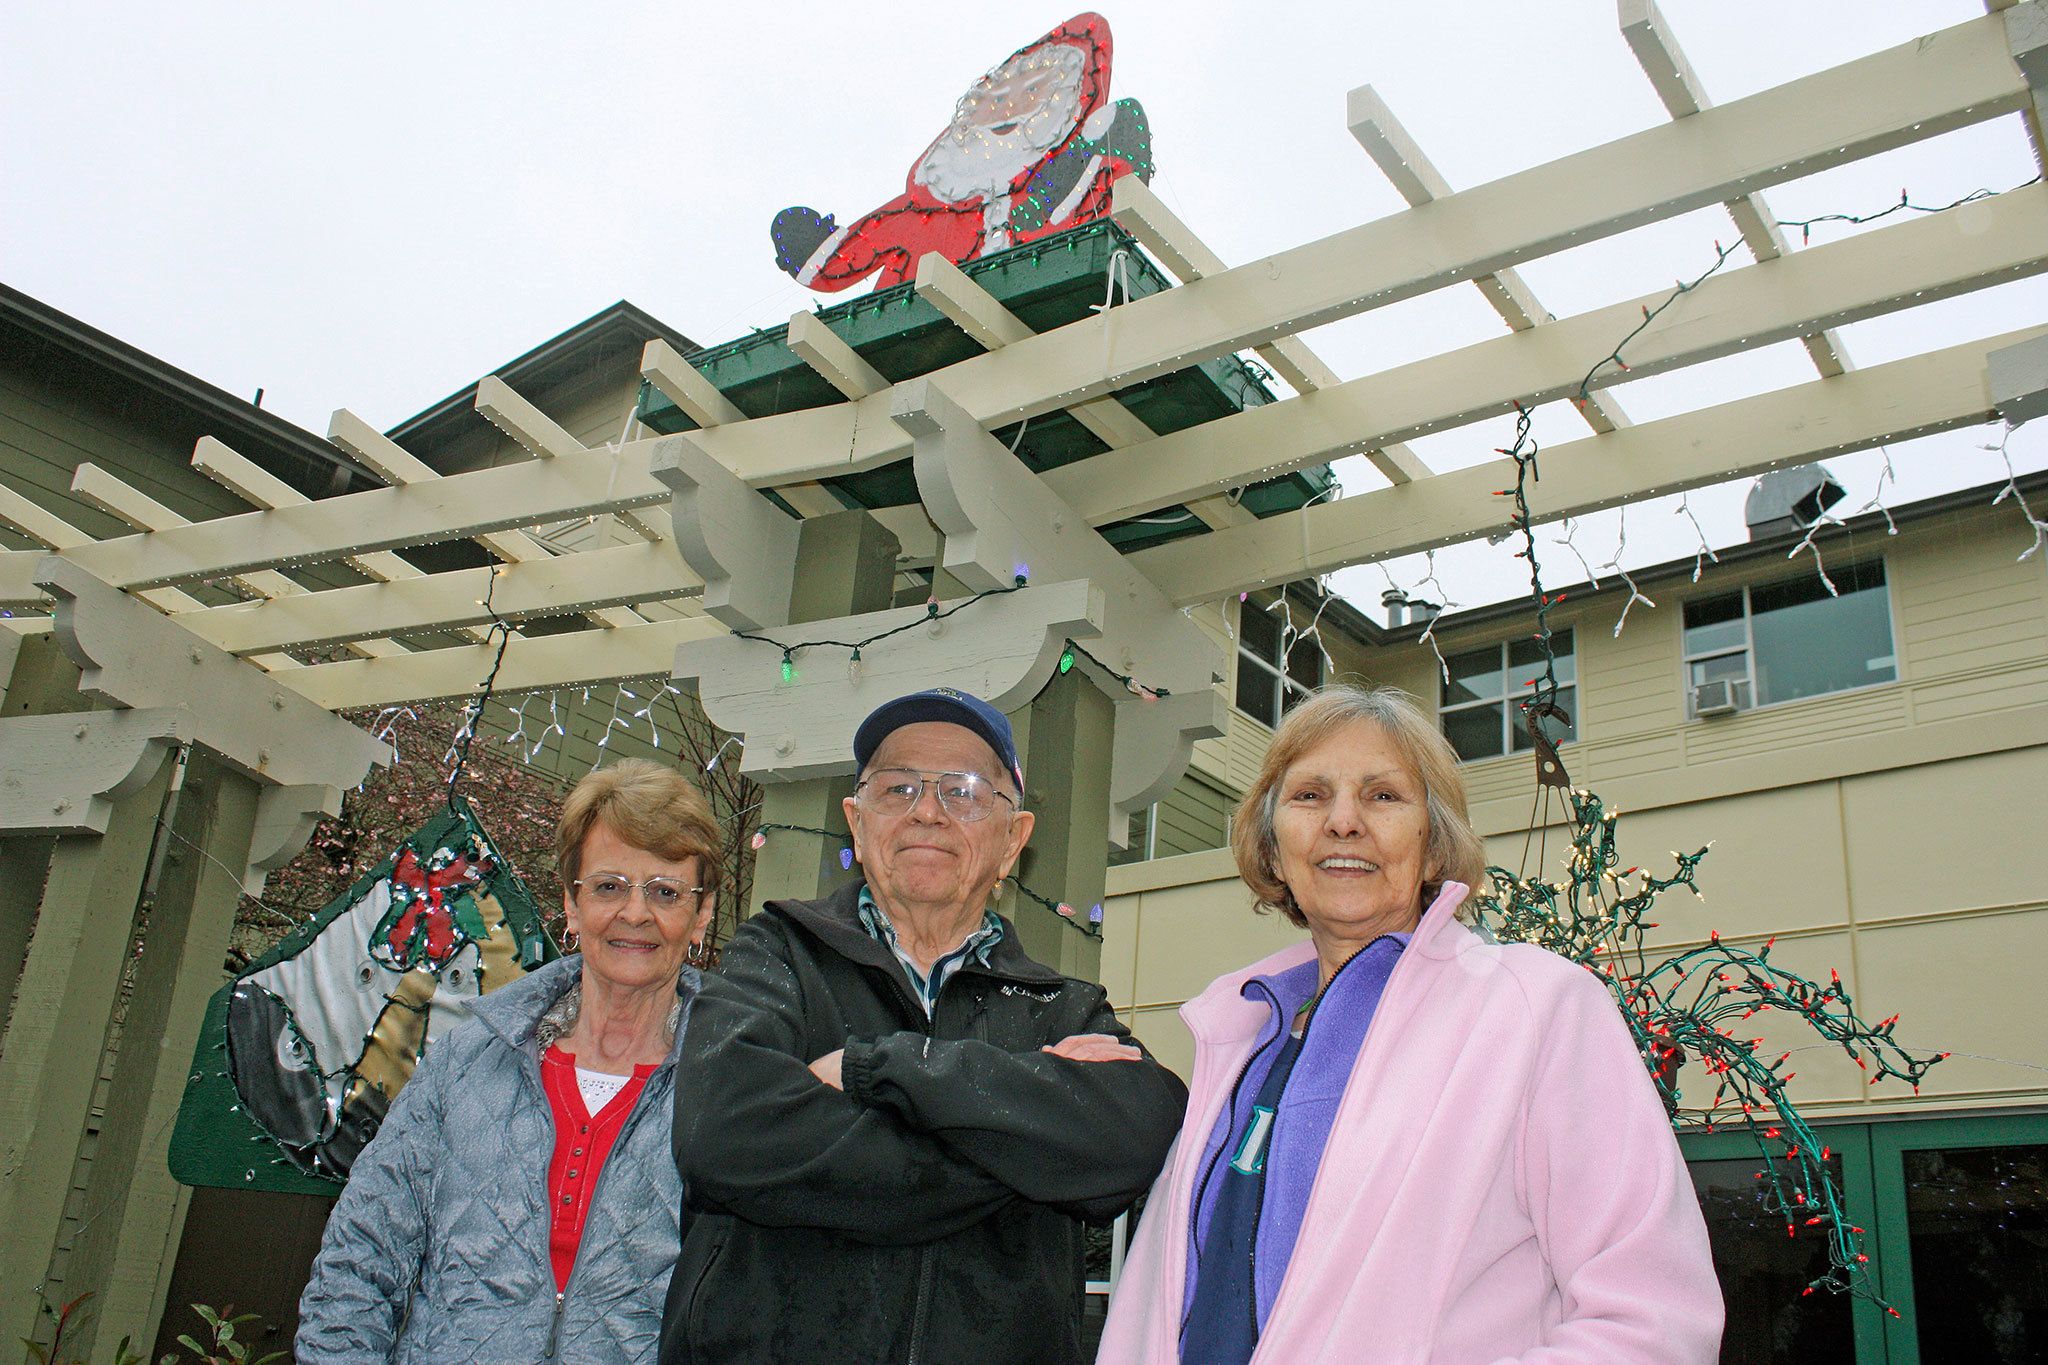 Harrison House tenants Dail Washburn, left, Bill Long, middle, Lynn Hamilton, right, and Blair Olson, not pictured, led the holiday decoration and lighting effort. MARK KLAAS, Kent Reporter